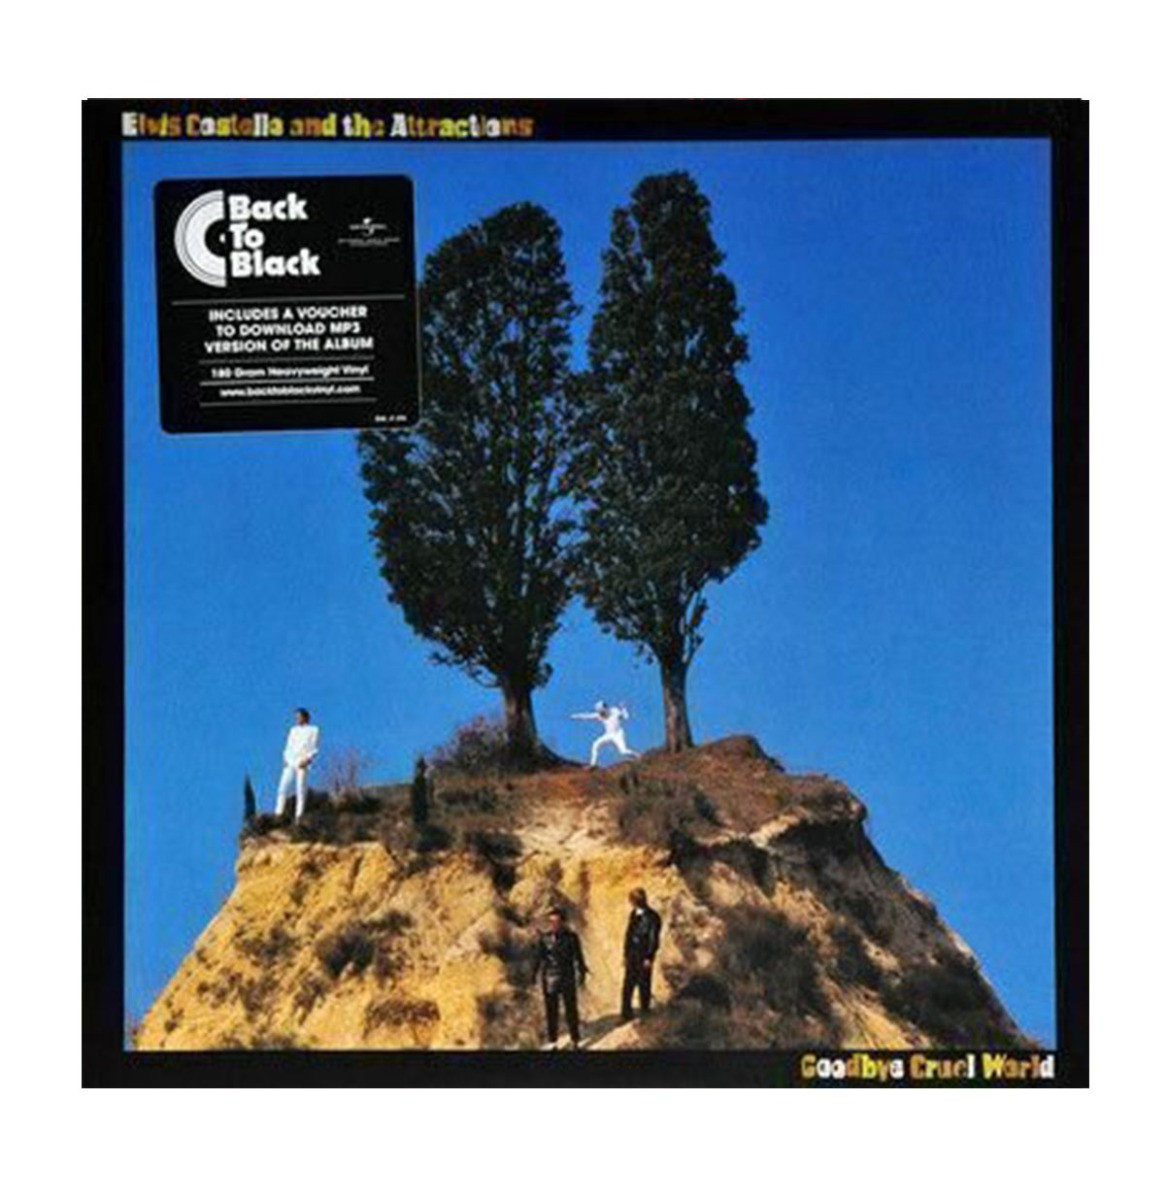 Elvis Costello and the Attractions - Goodbye Cruel World LP